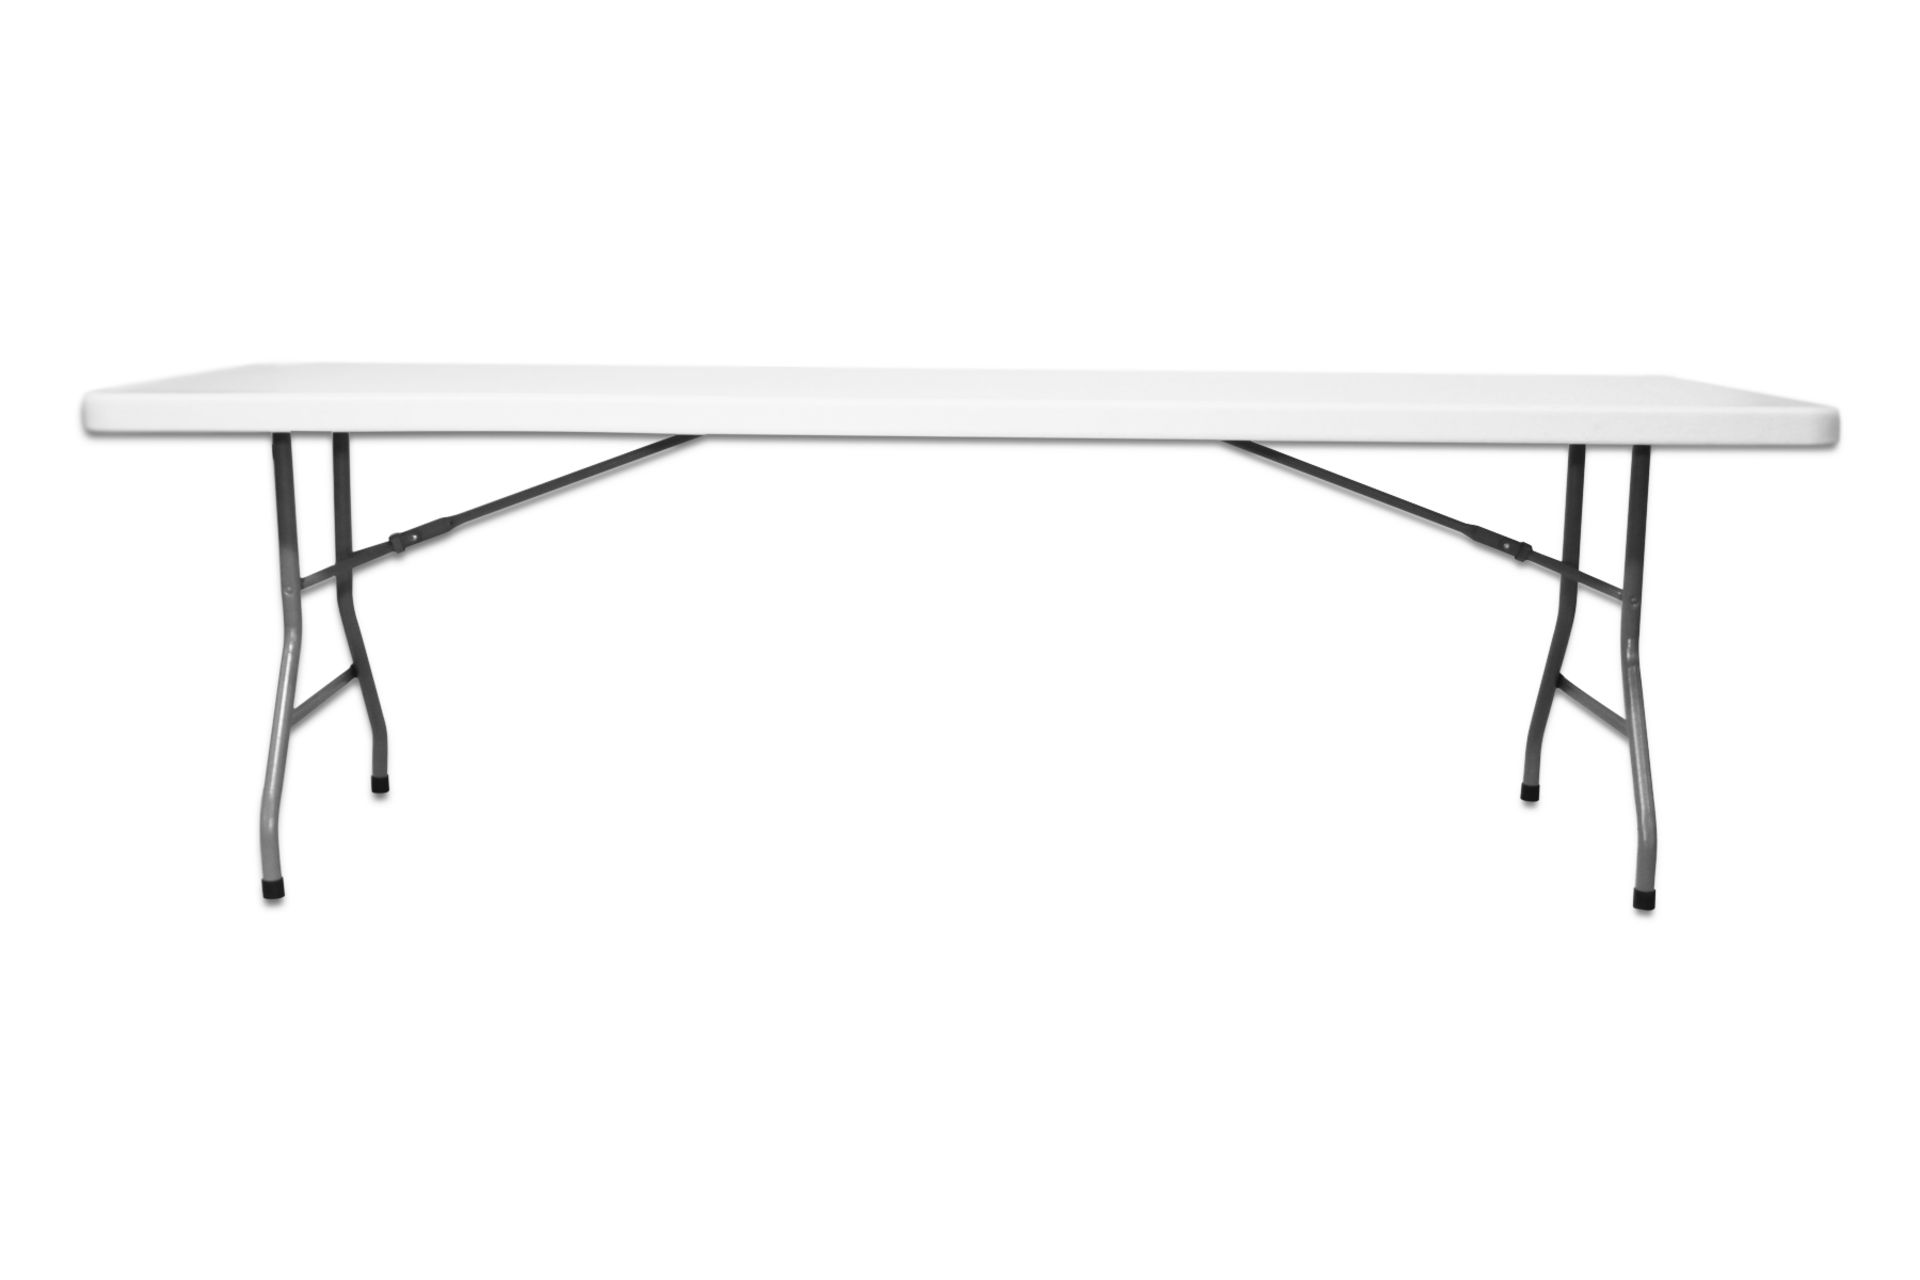 V *TRADE QTY* Grade A 8ft Plastic Trestle Table X 30 YOUR BID PRICE TO BE MULTIPLIED BY THIRTY